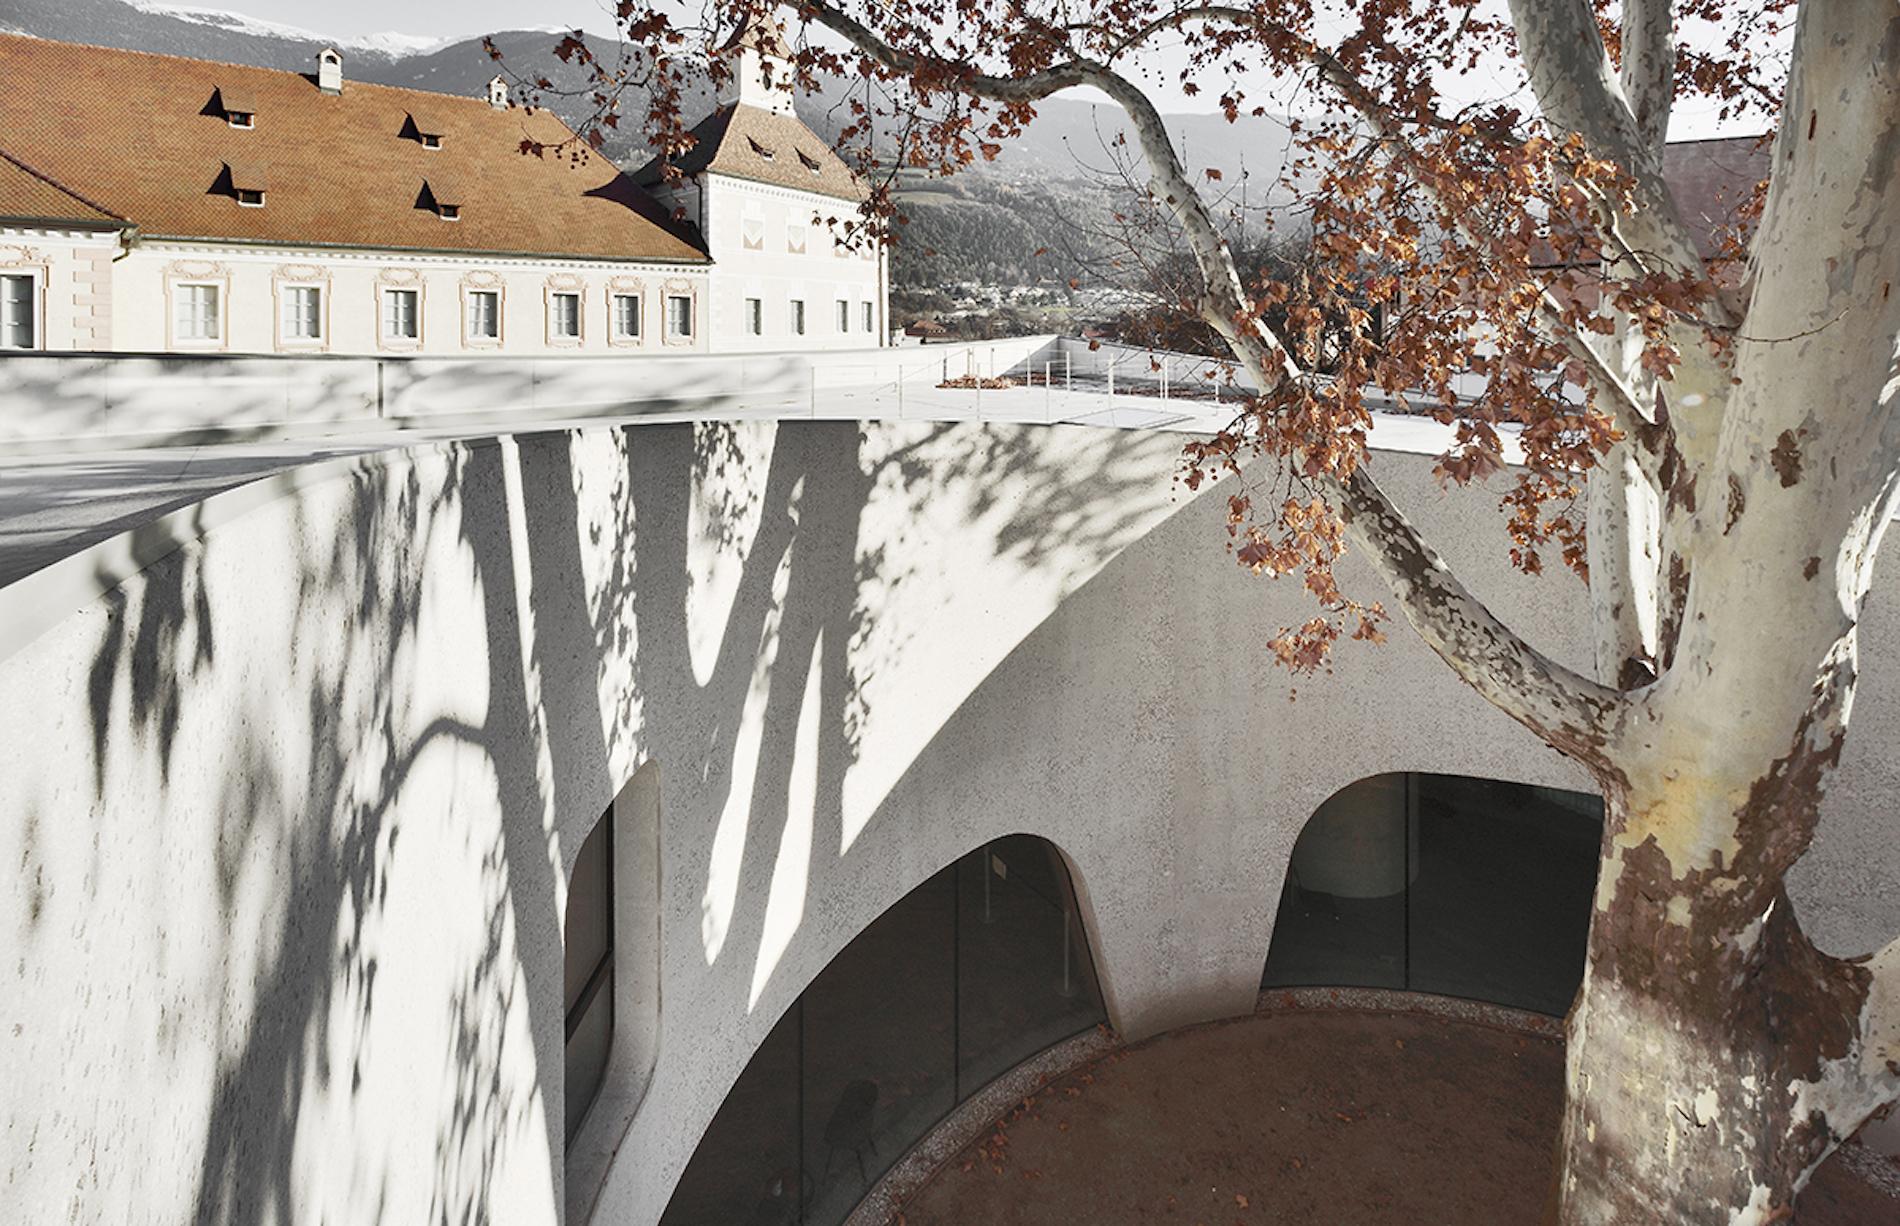 This Sinuous Tourist Office Is Inspired by the Tree it Enwraps